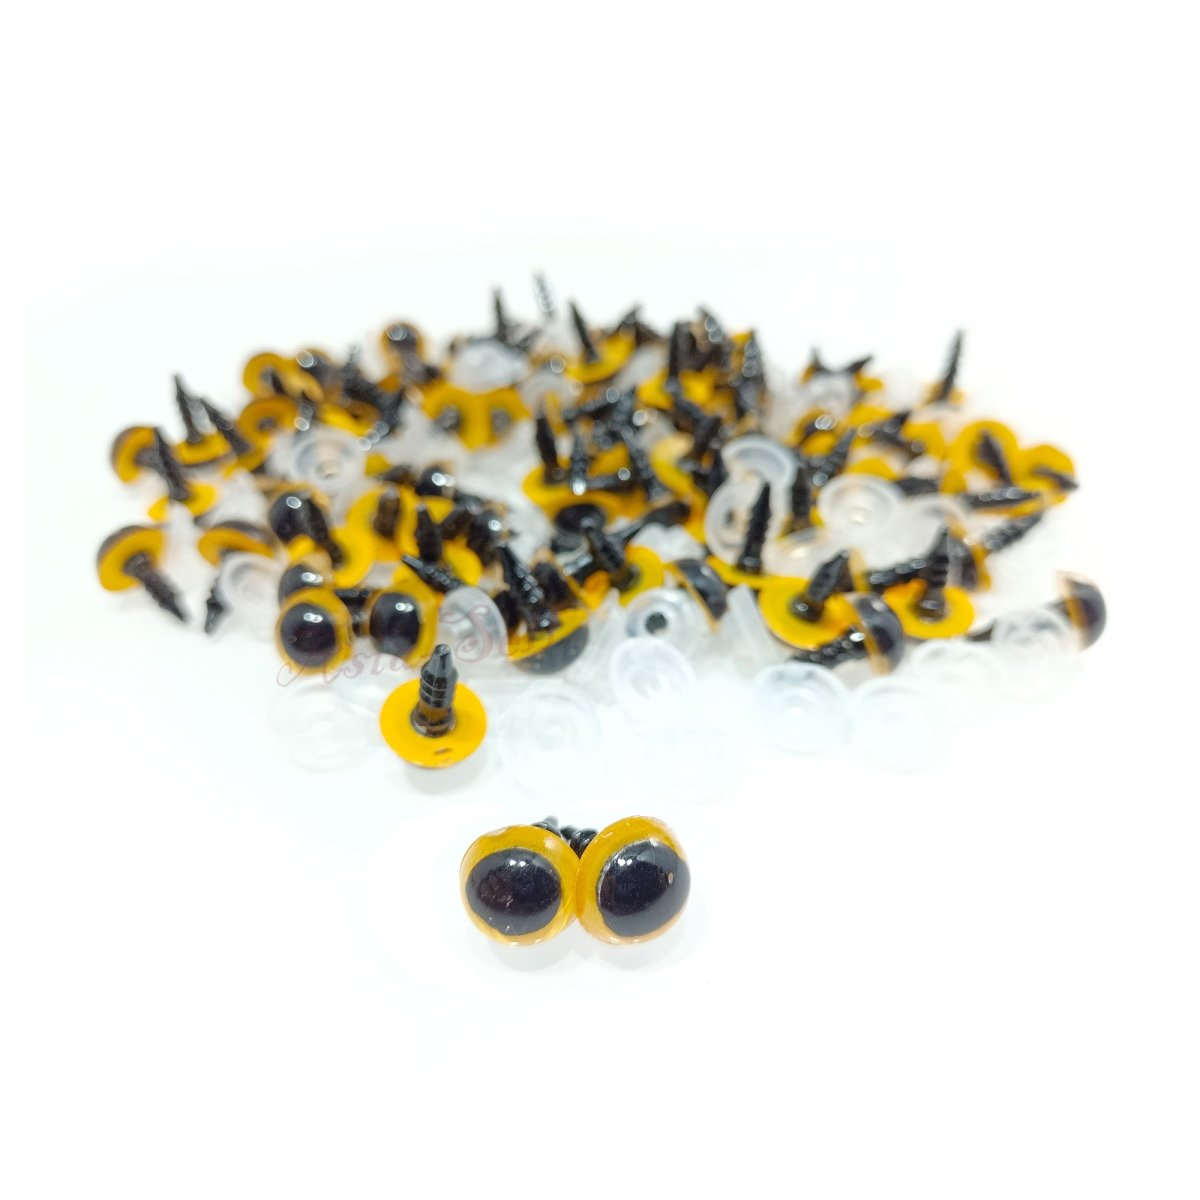 20pcs 10mm Colour Safety Eyes For Teddy Bear Doll Animal Puppet Crafts Plastic Eyes - Light Brown / Yellow - - Asia Sell